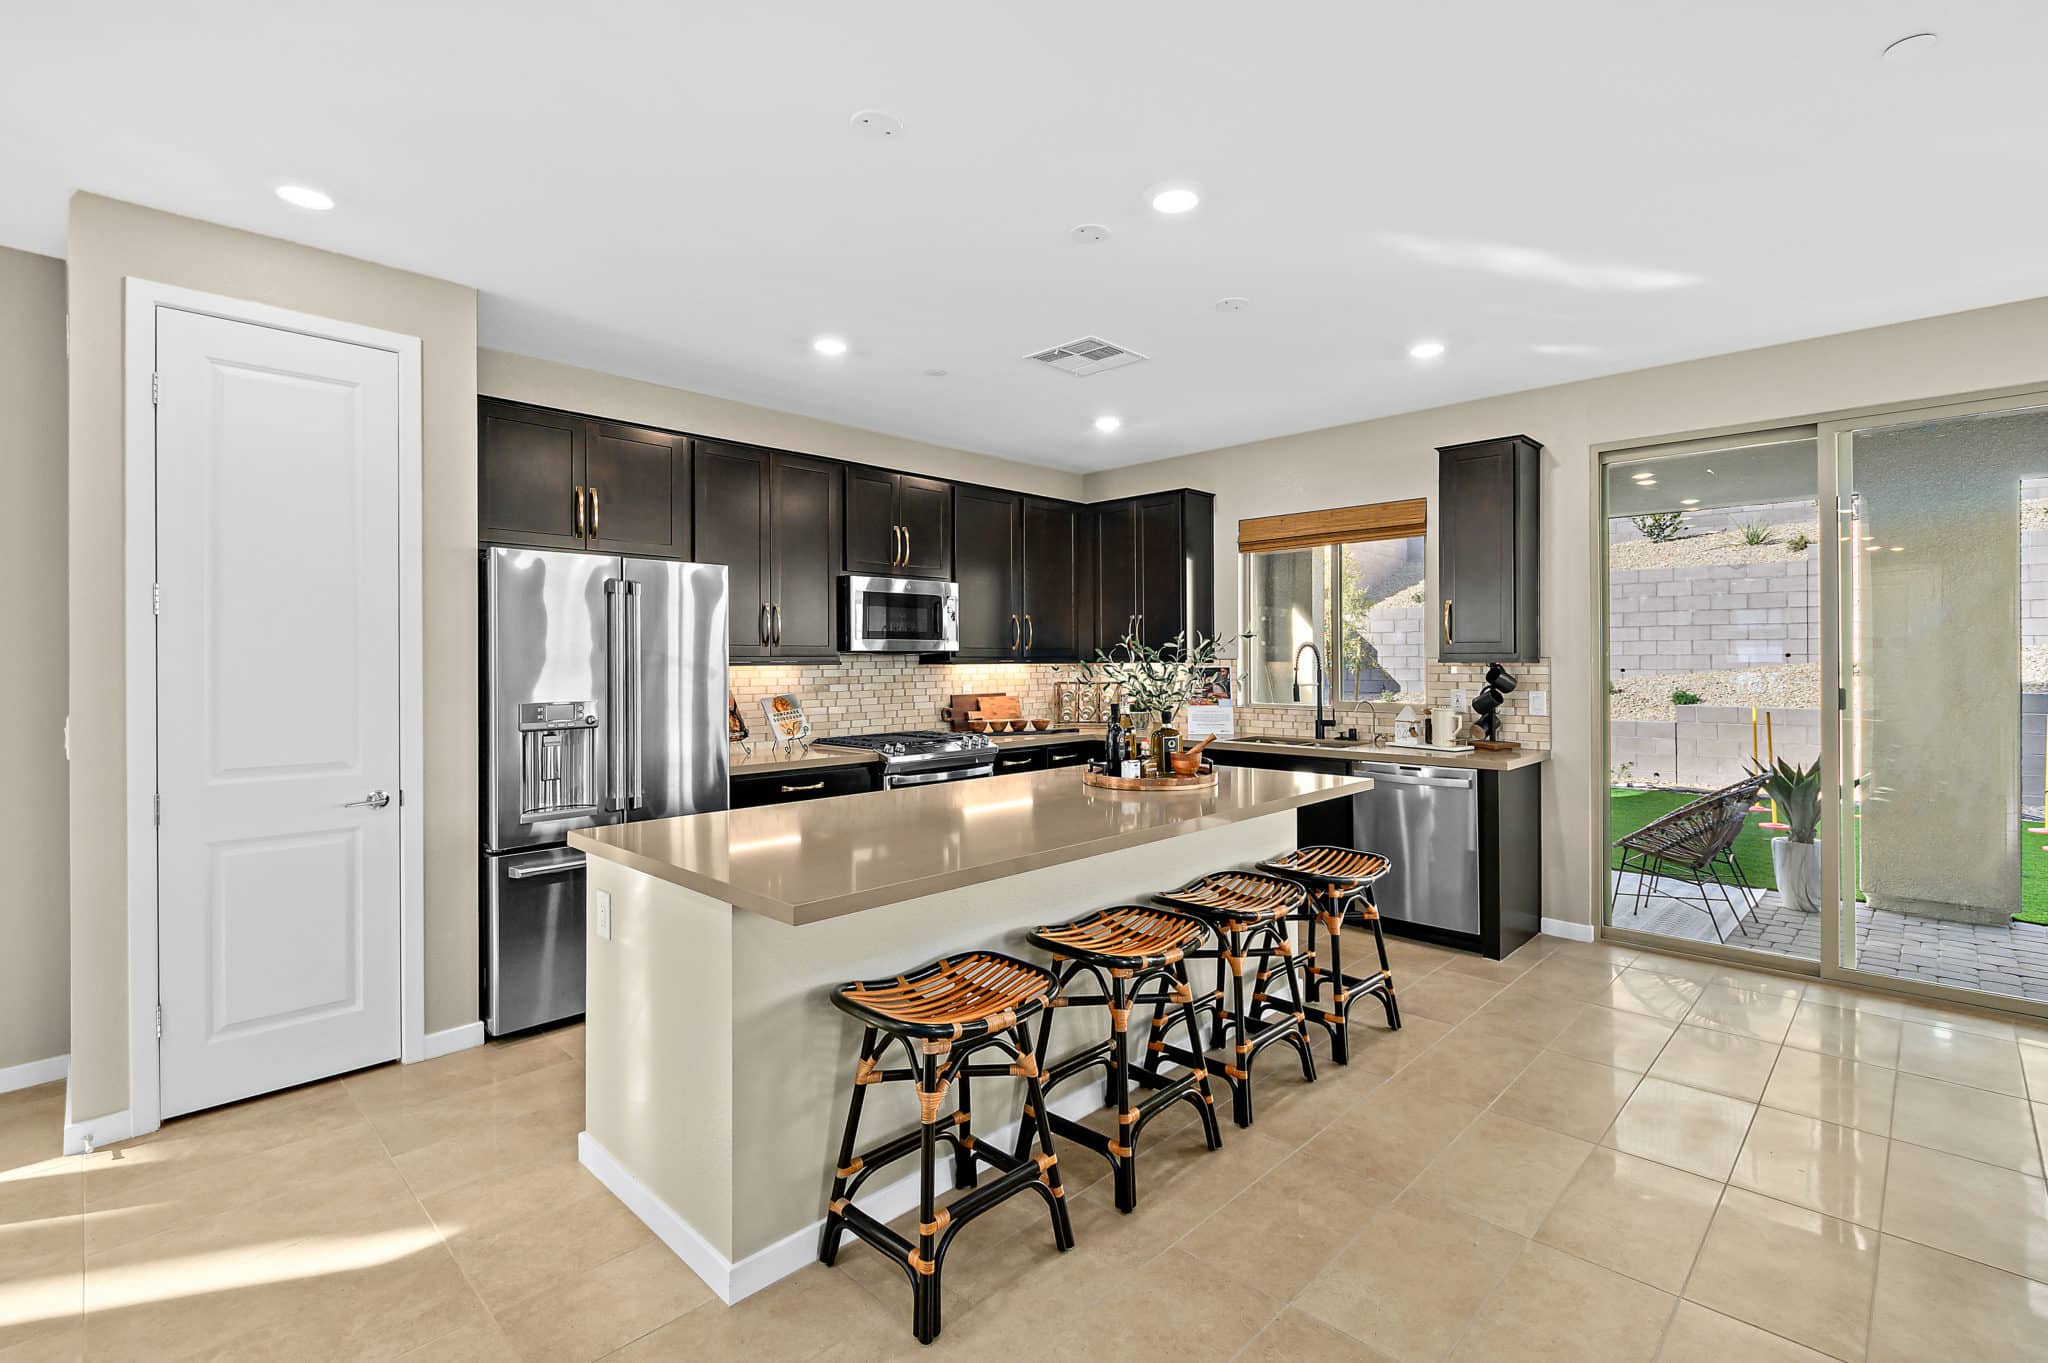 Kitchen of Sequoia Model at Castellana by Taylor Morrison